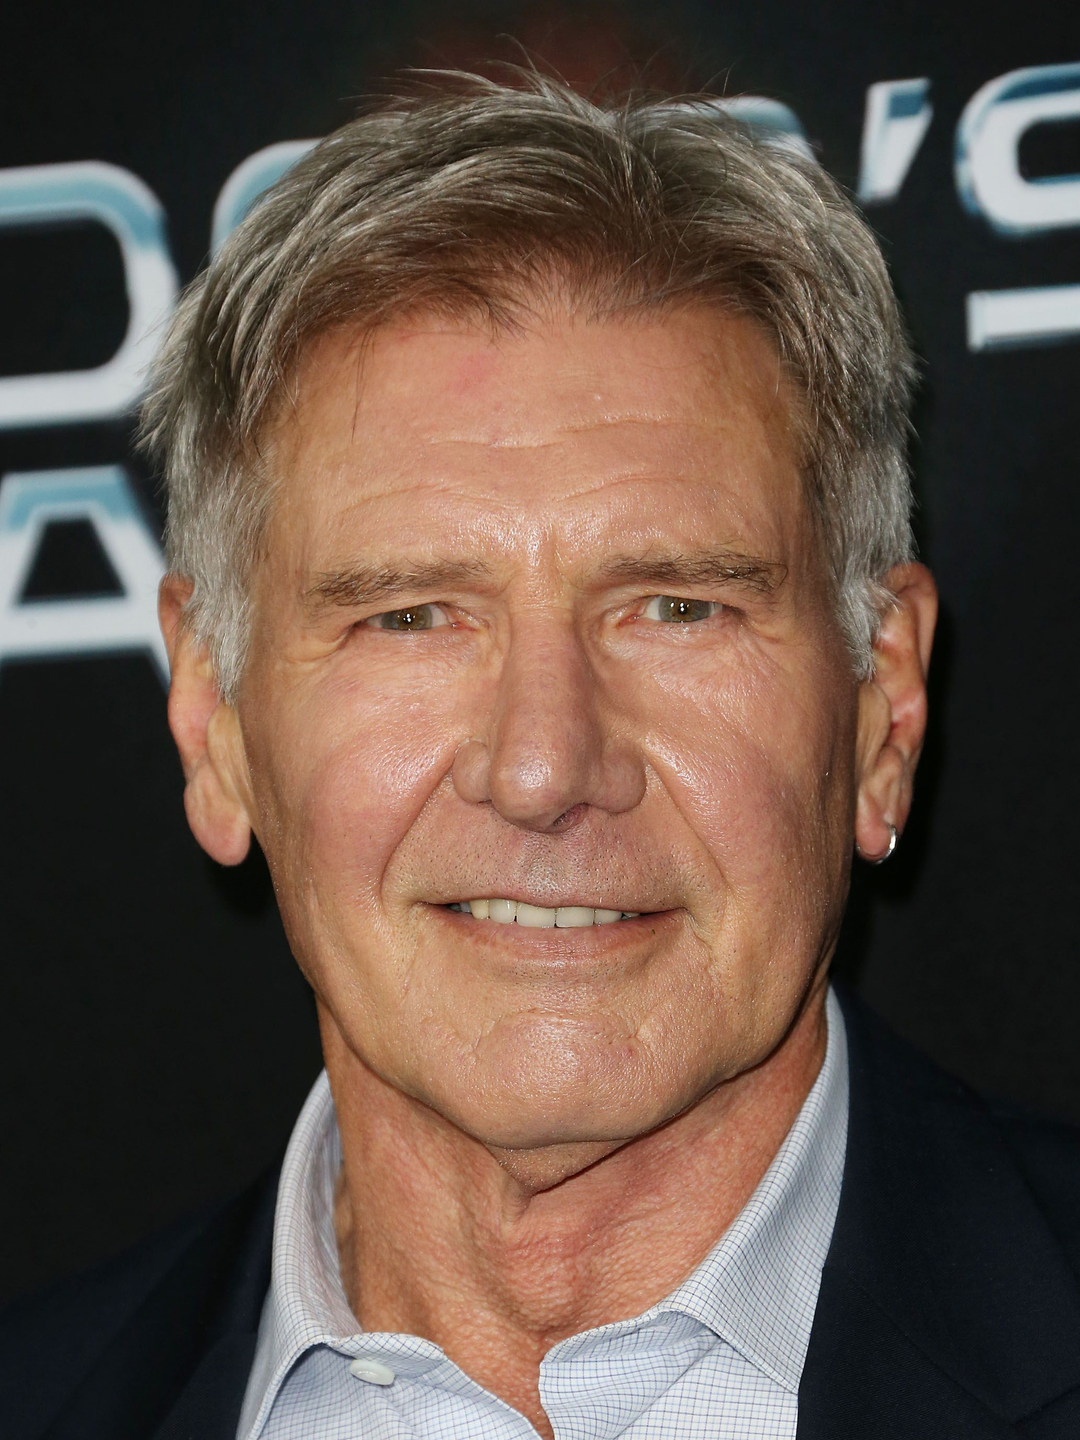 Harrison Ford appearance